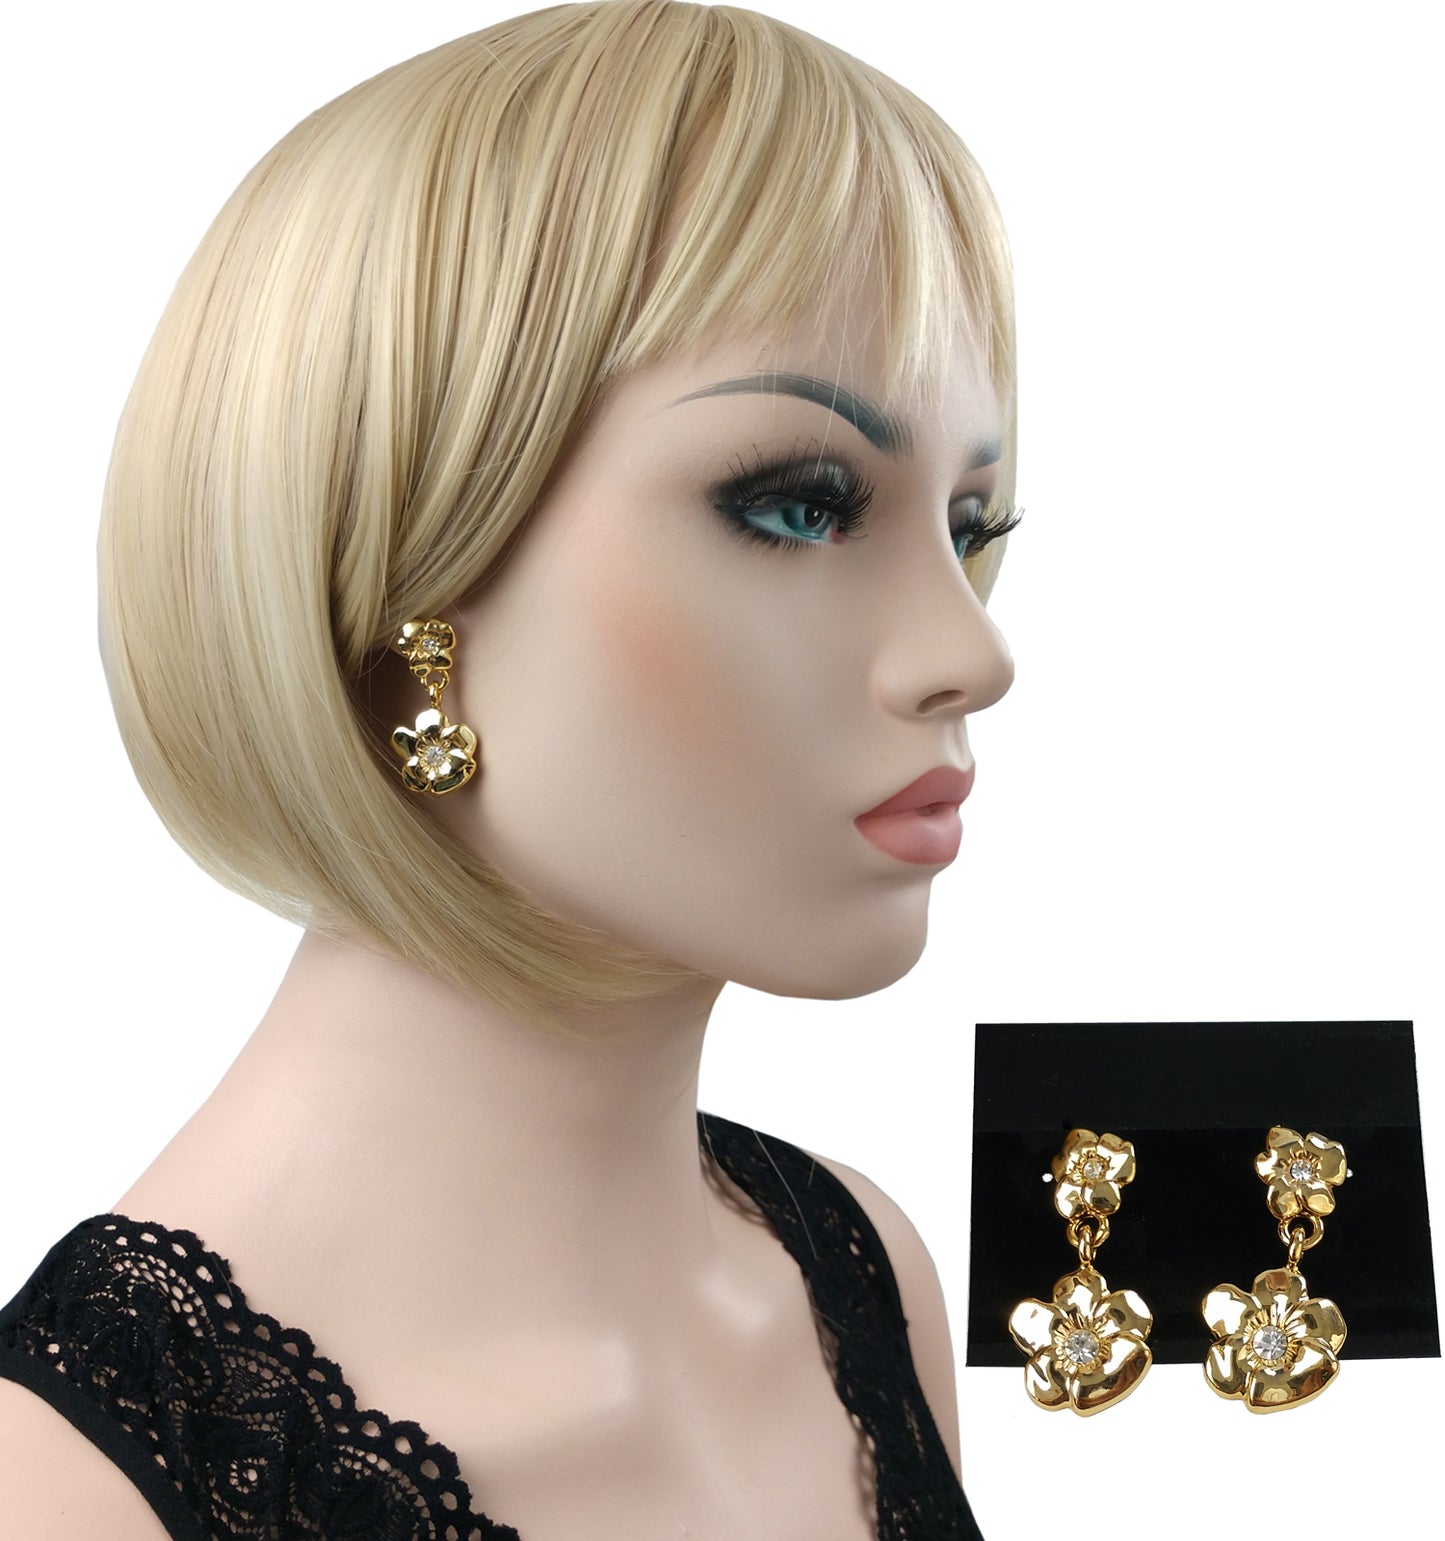 Flower Statement Earrings Polished Gold Tone 1 1/2"